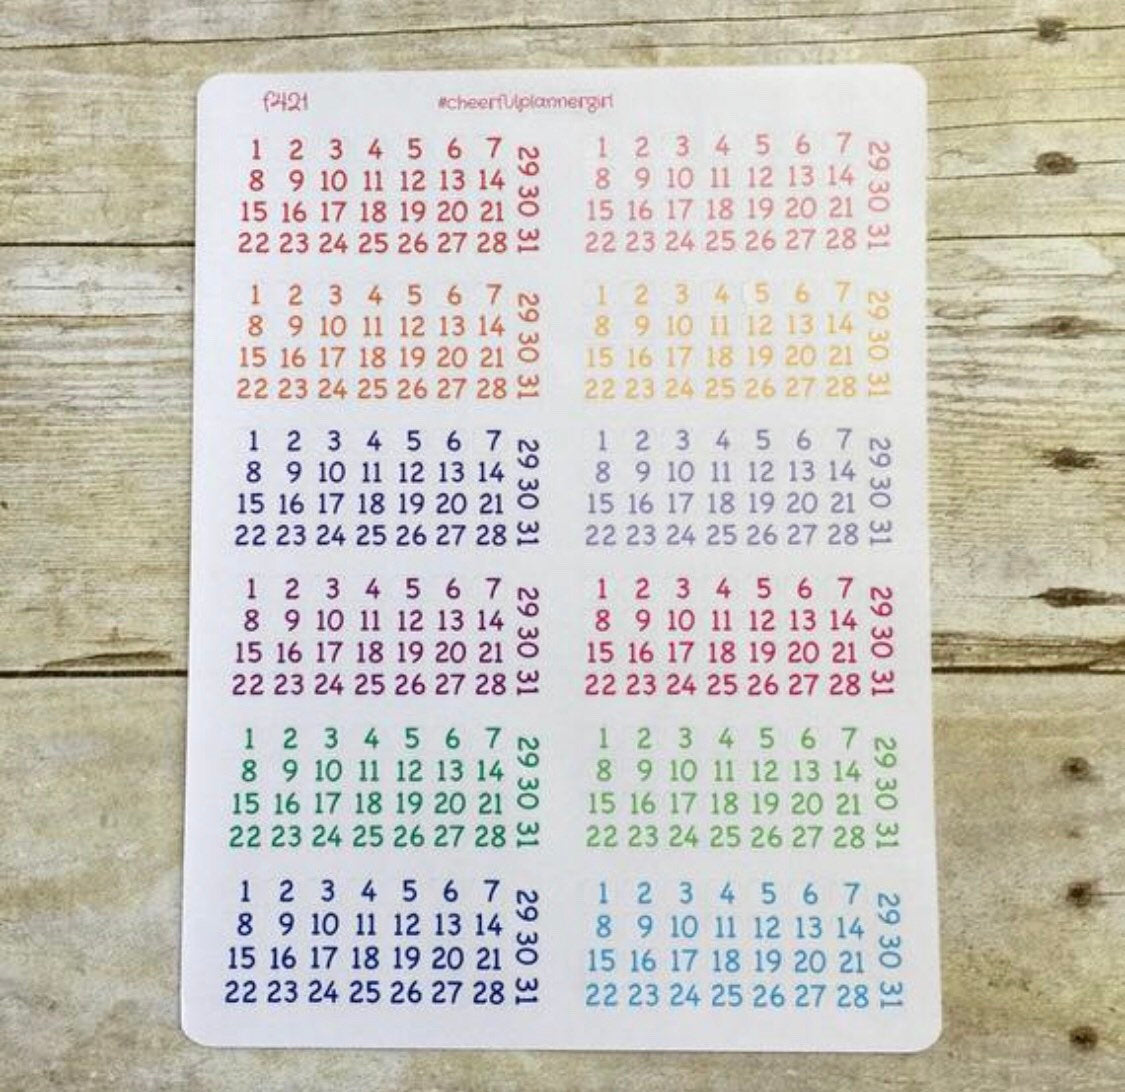 744 Pcs Planner Number Sticker Foiled Date Dots Stickers Calendar Number  Stickers Dates Planner Stickers in Rainbow Colors for Planners Journals